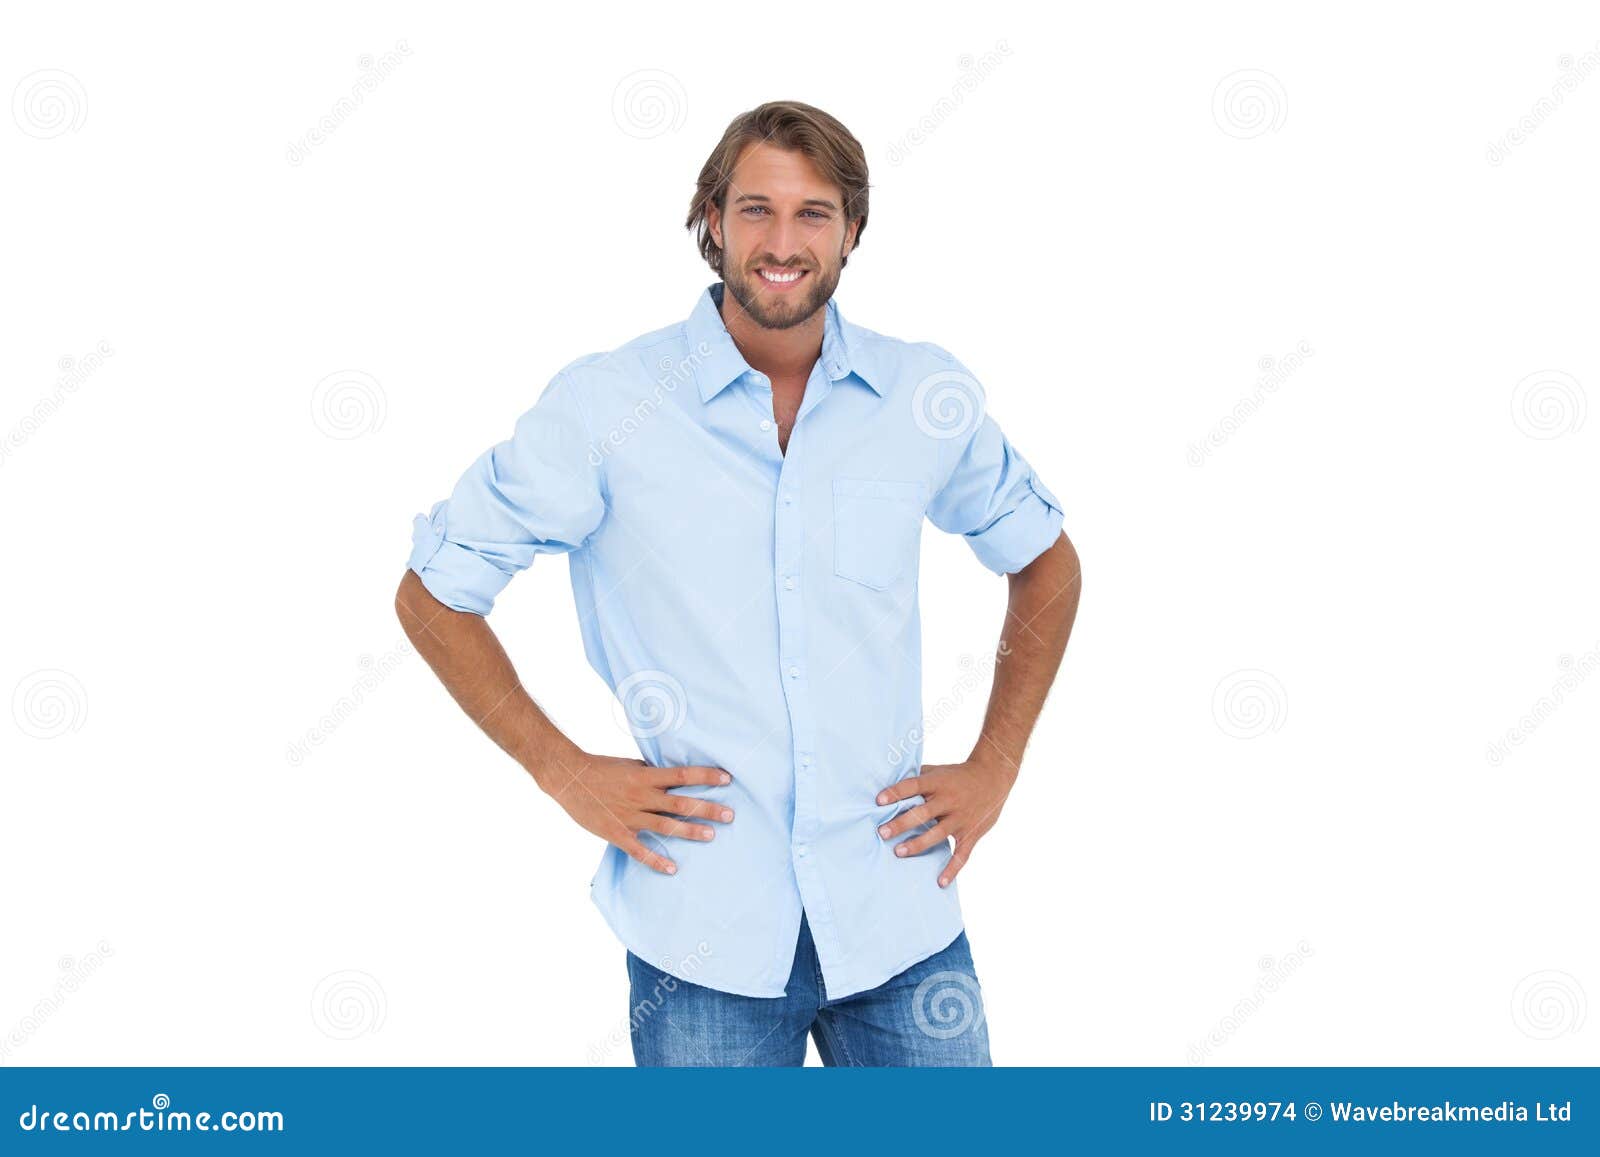 Handsome Man Smiling With His Hands On Hips Stock Photo Image Of